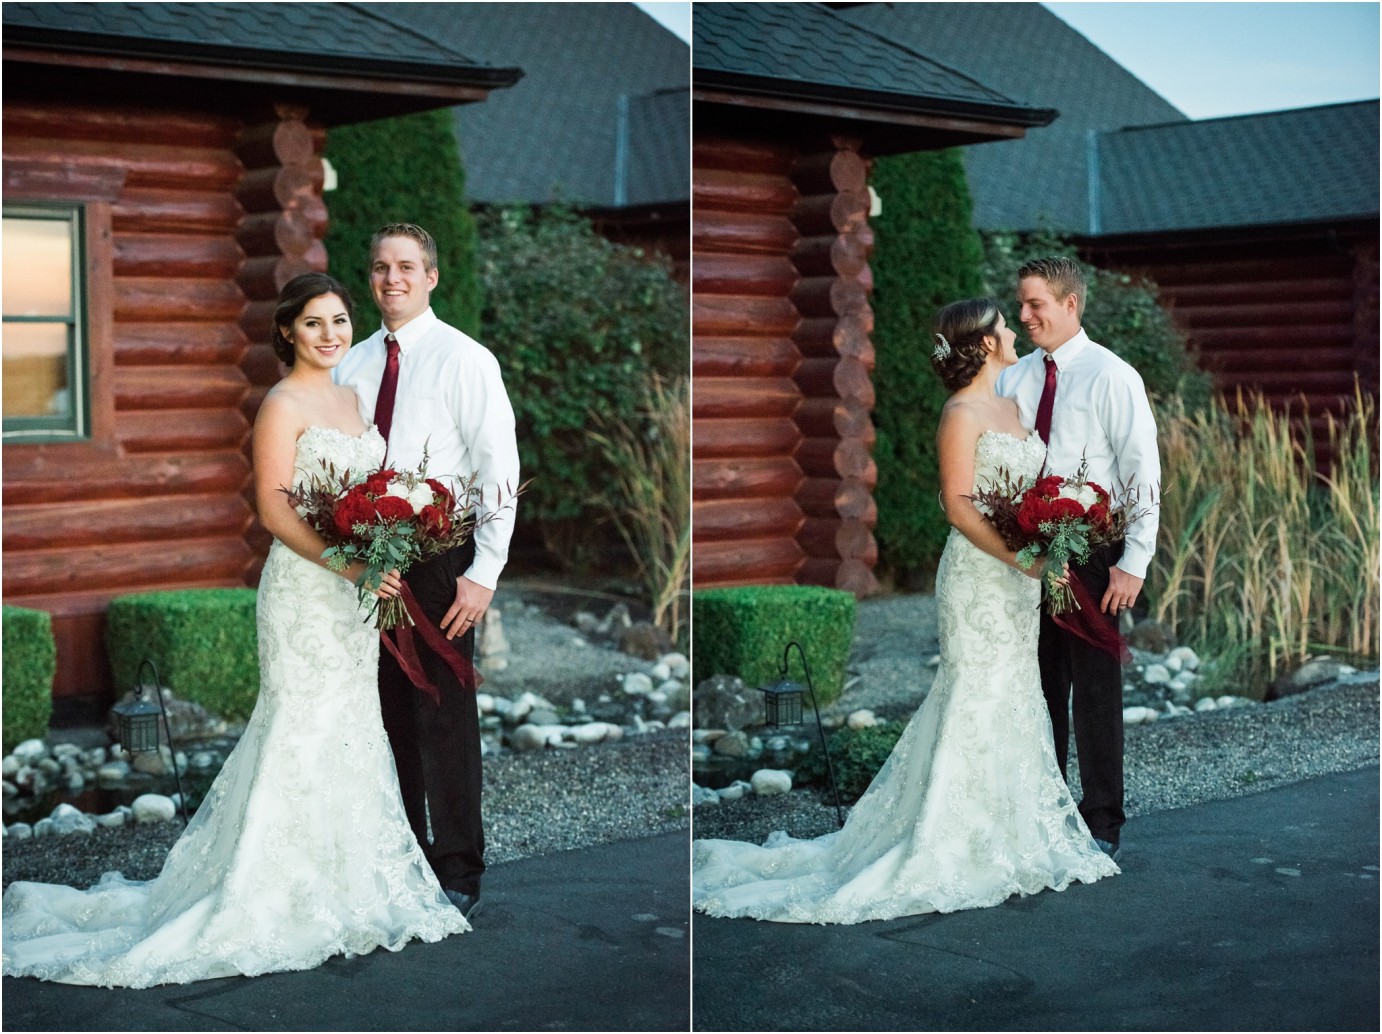 Eagle Lakes Lodge Wedding Inspiration Shoot bride and groom in front of lodge photo